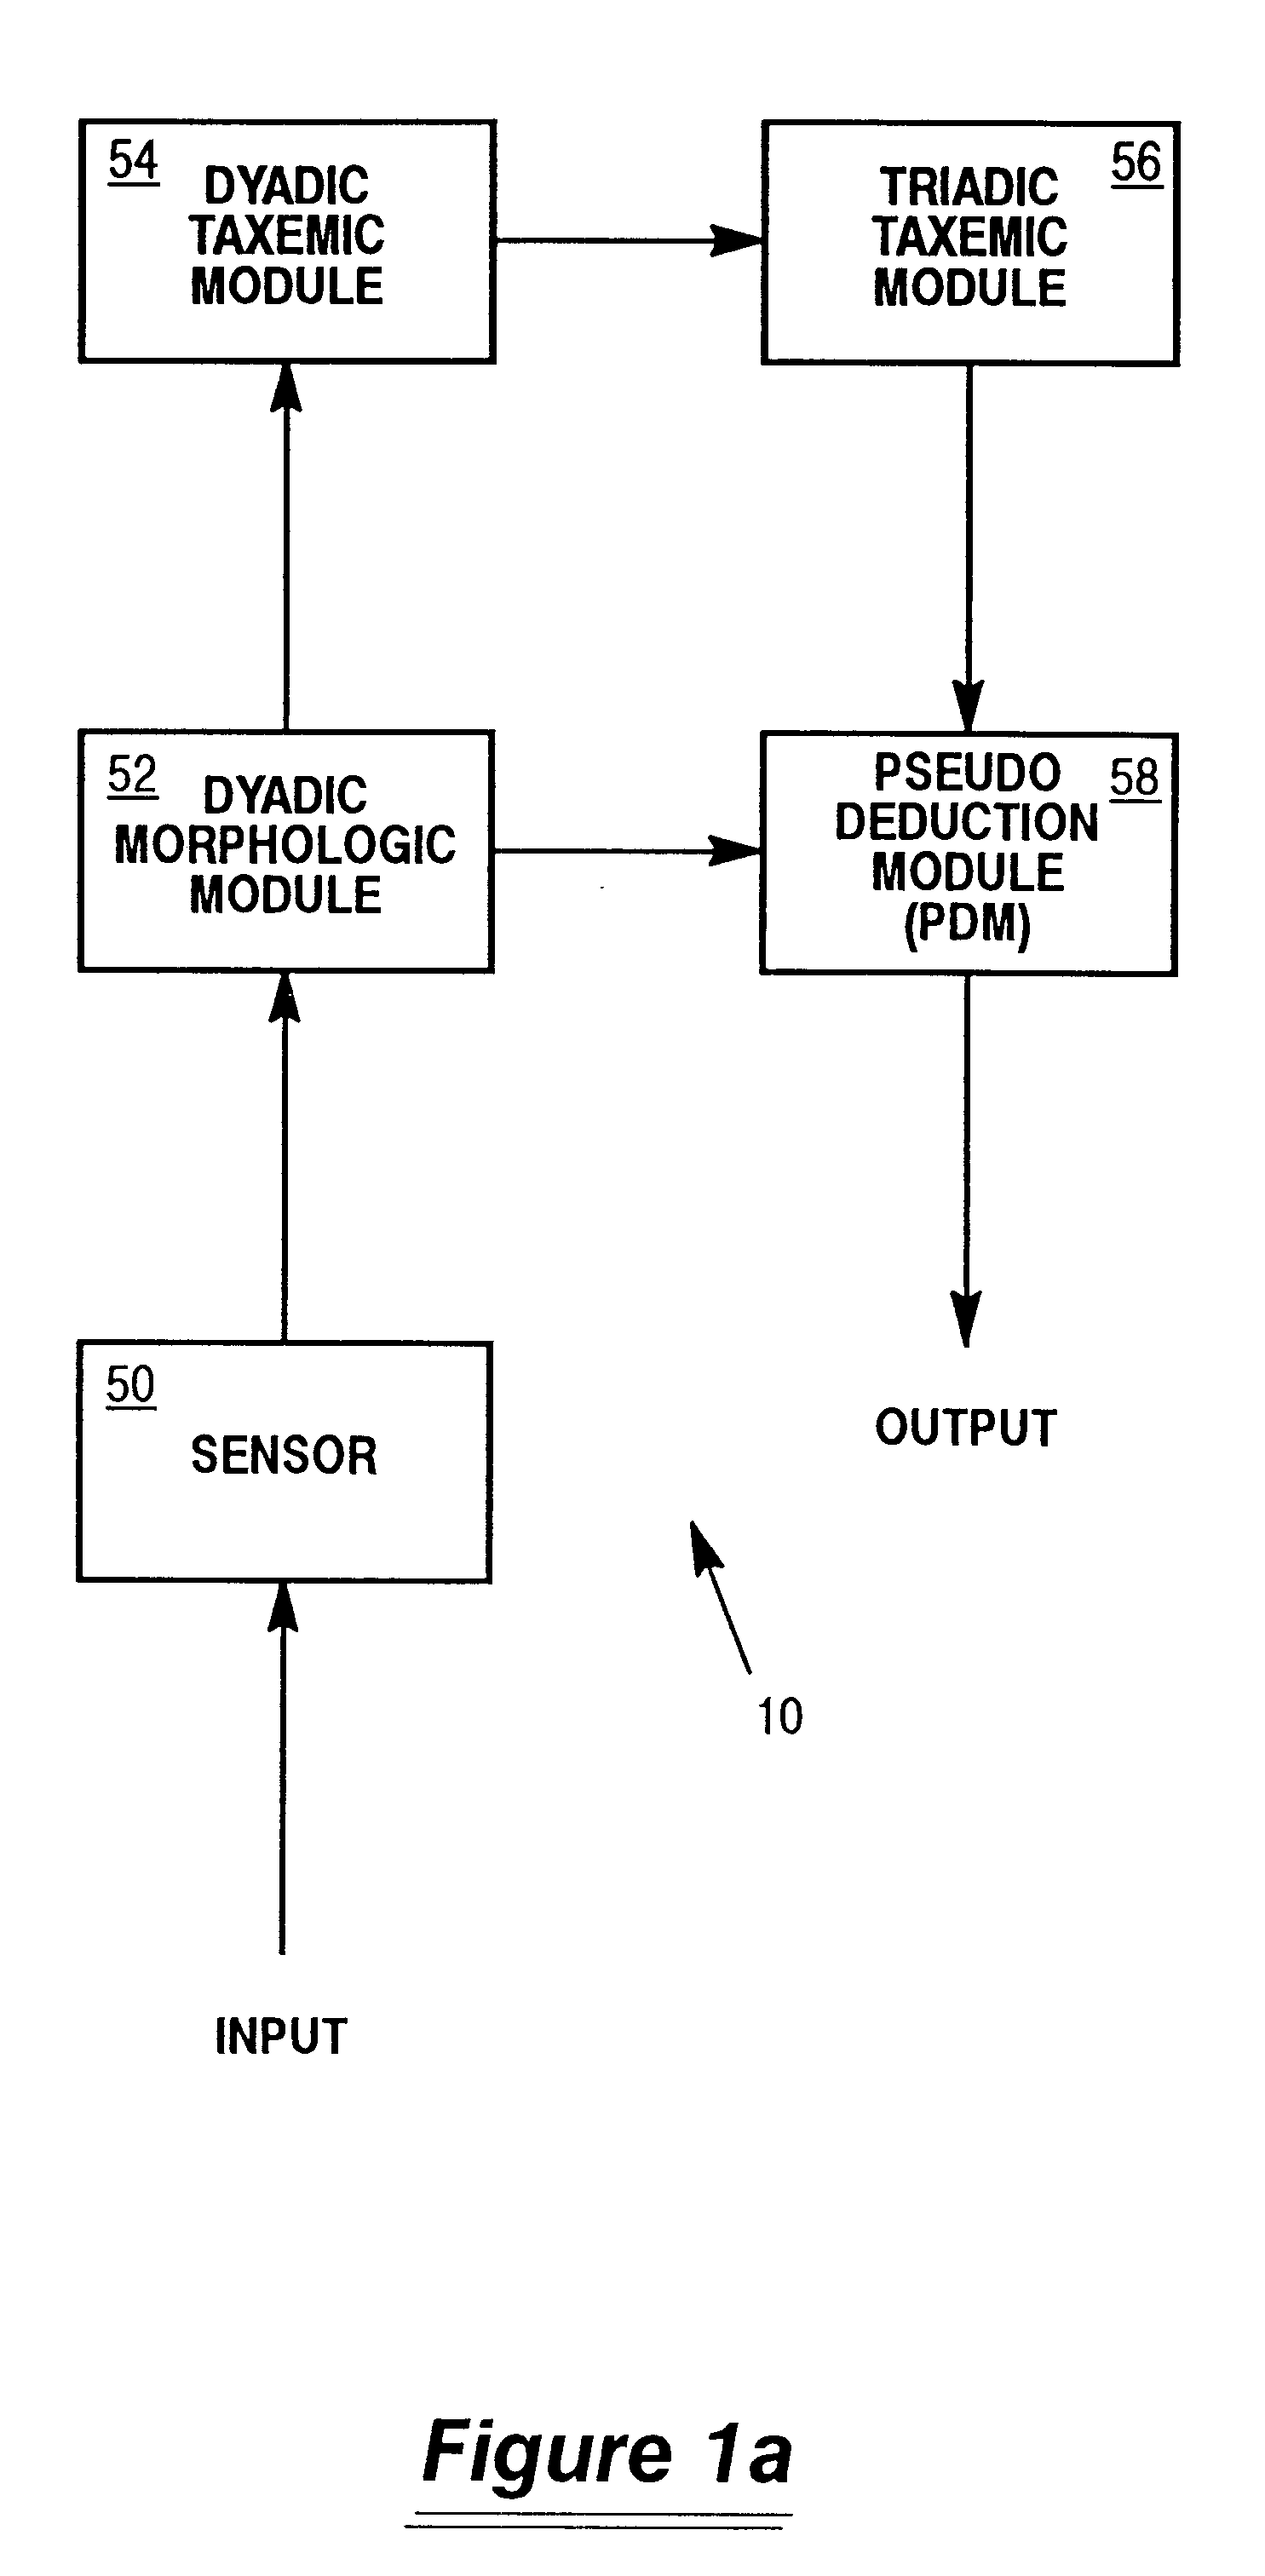 Semiotic decision making system for responding to natural language queries and components thereof